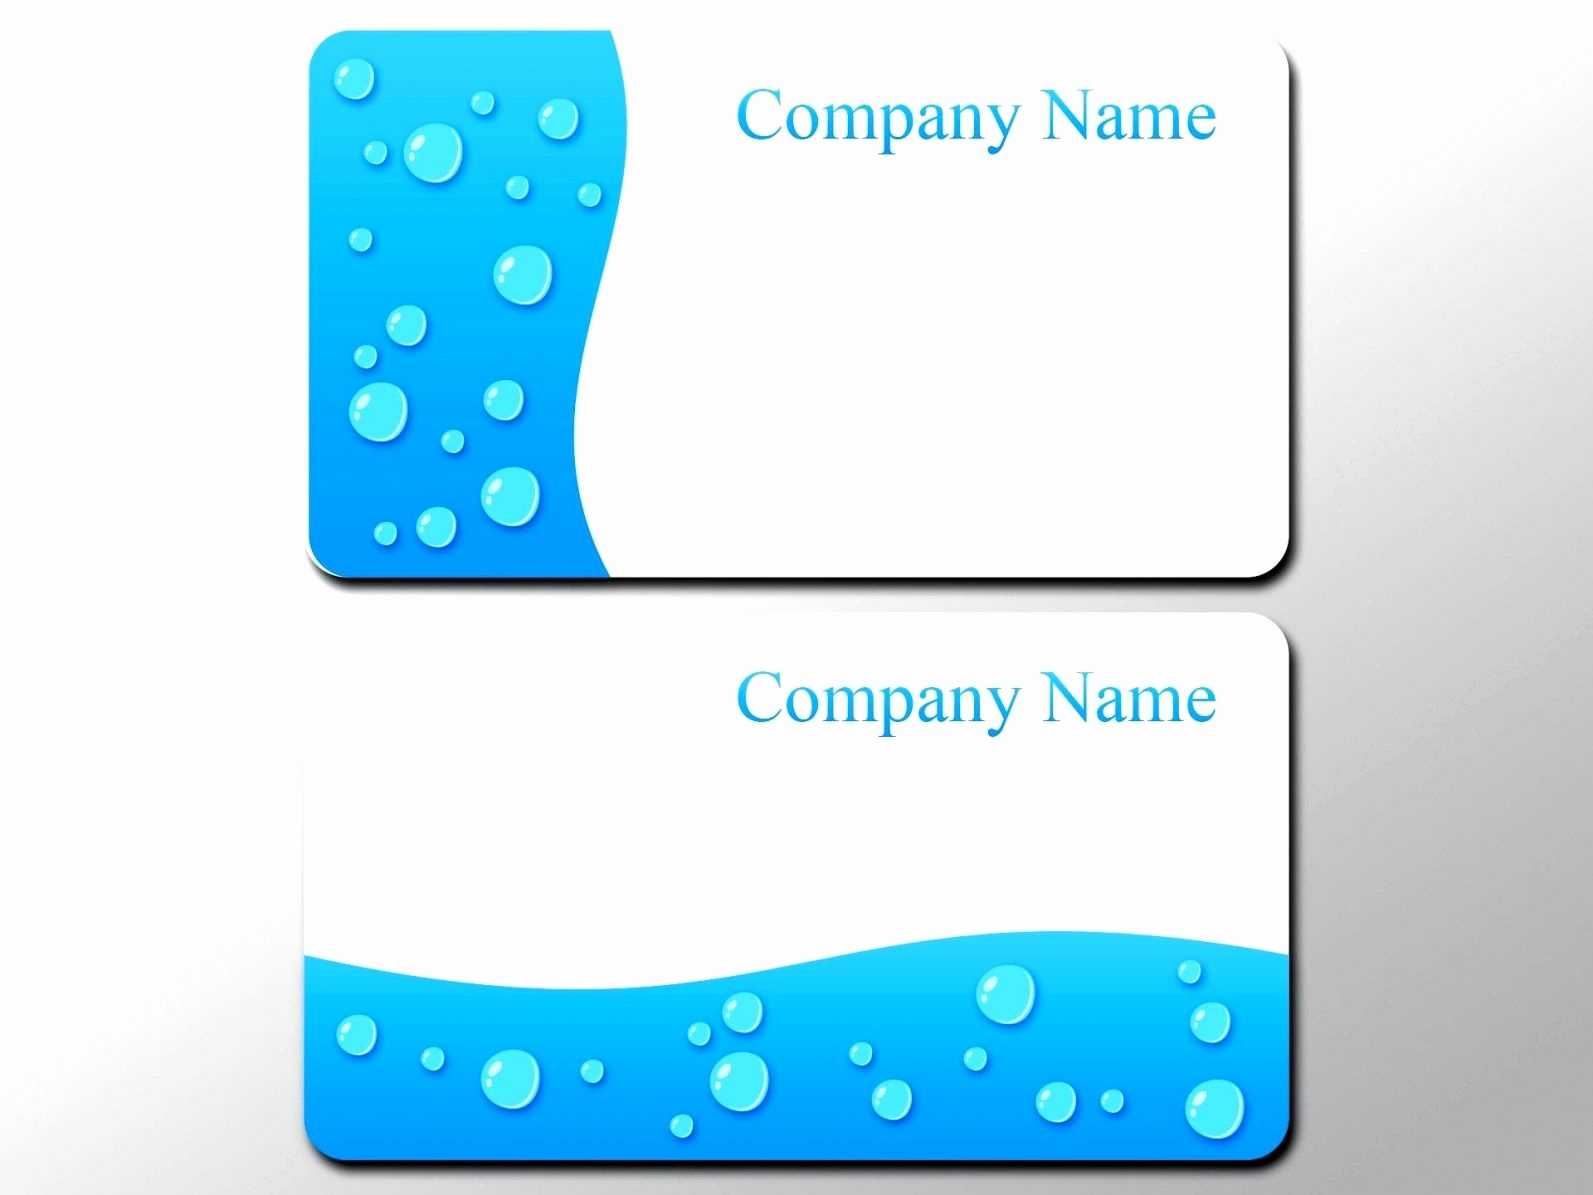 Business Card Format Photoshop Template Cc Beautiful For For Business Card Template Size Photoshop